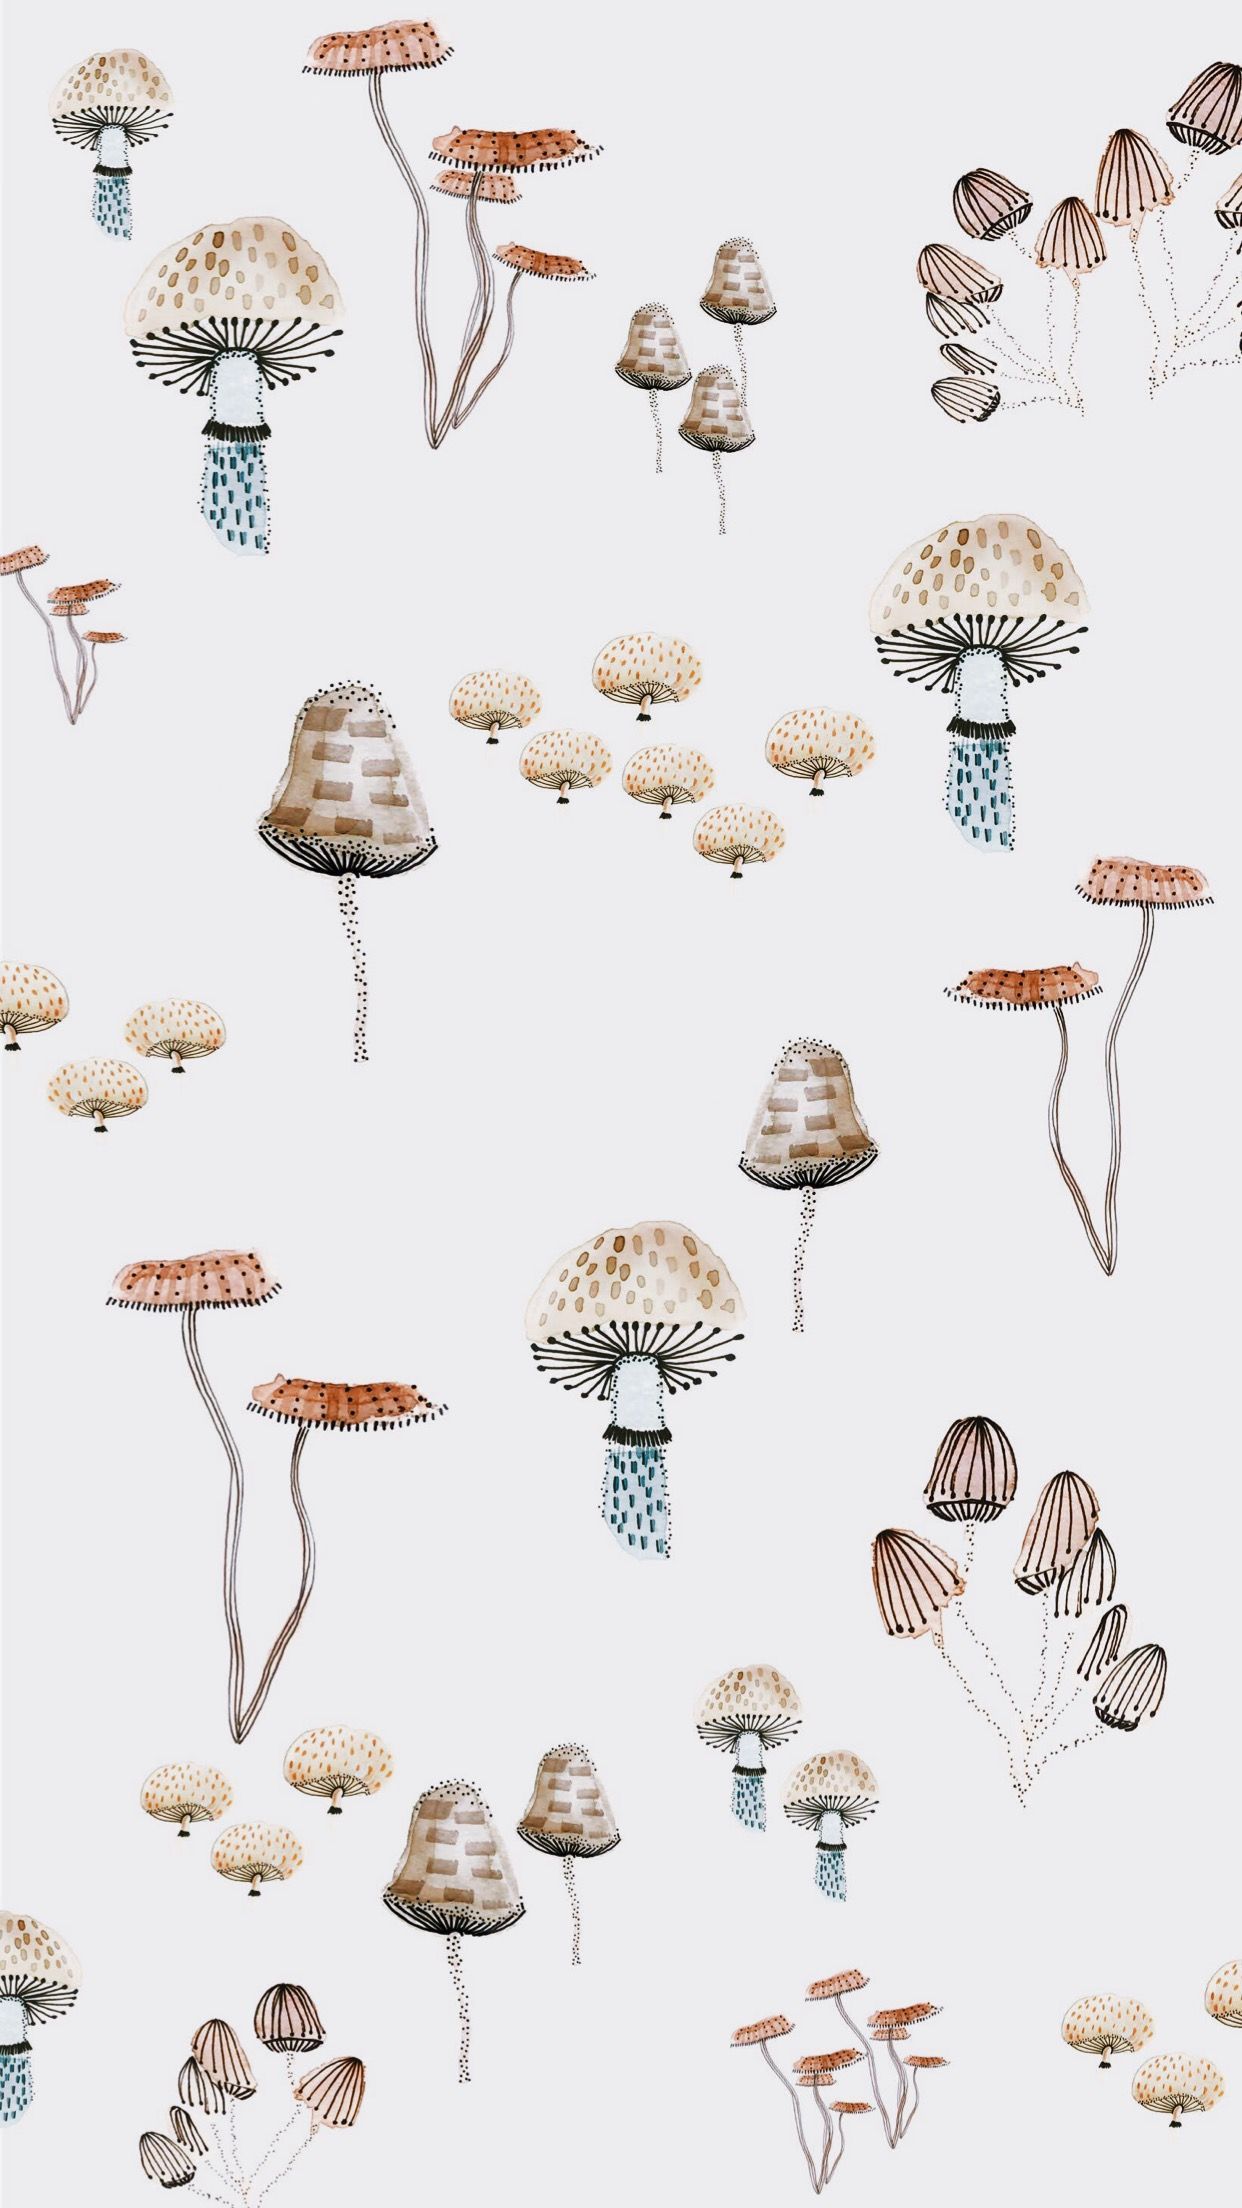 Mushroom Wallpapers and Backgrounds  WallpaperCG